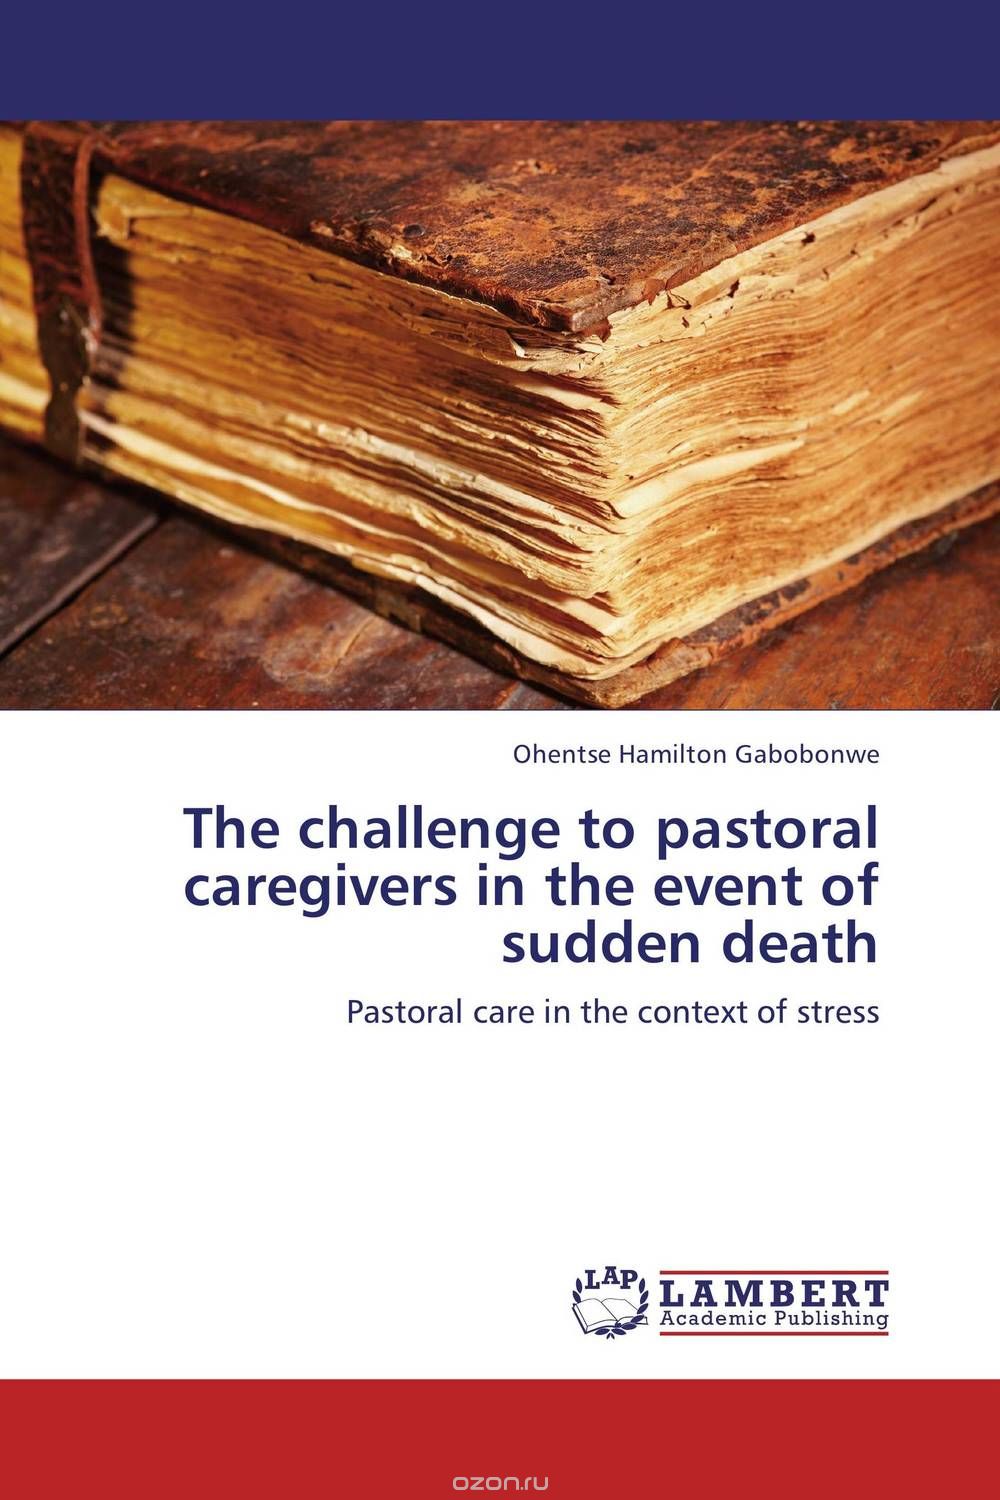 Скачать книгу "The challenge to pastoral caregivers in the event of sudden death"